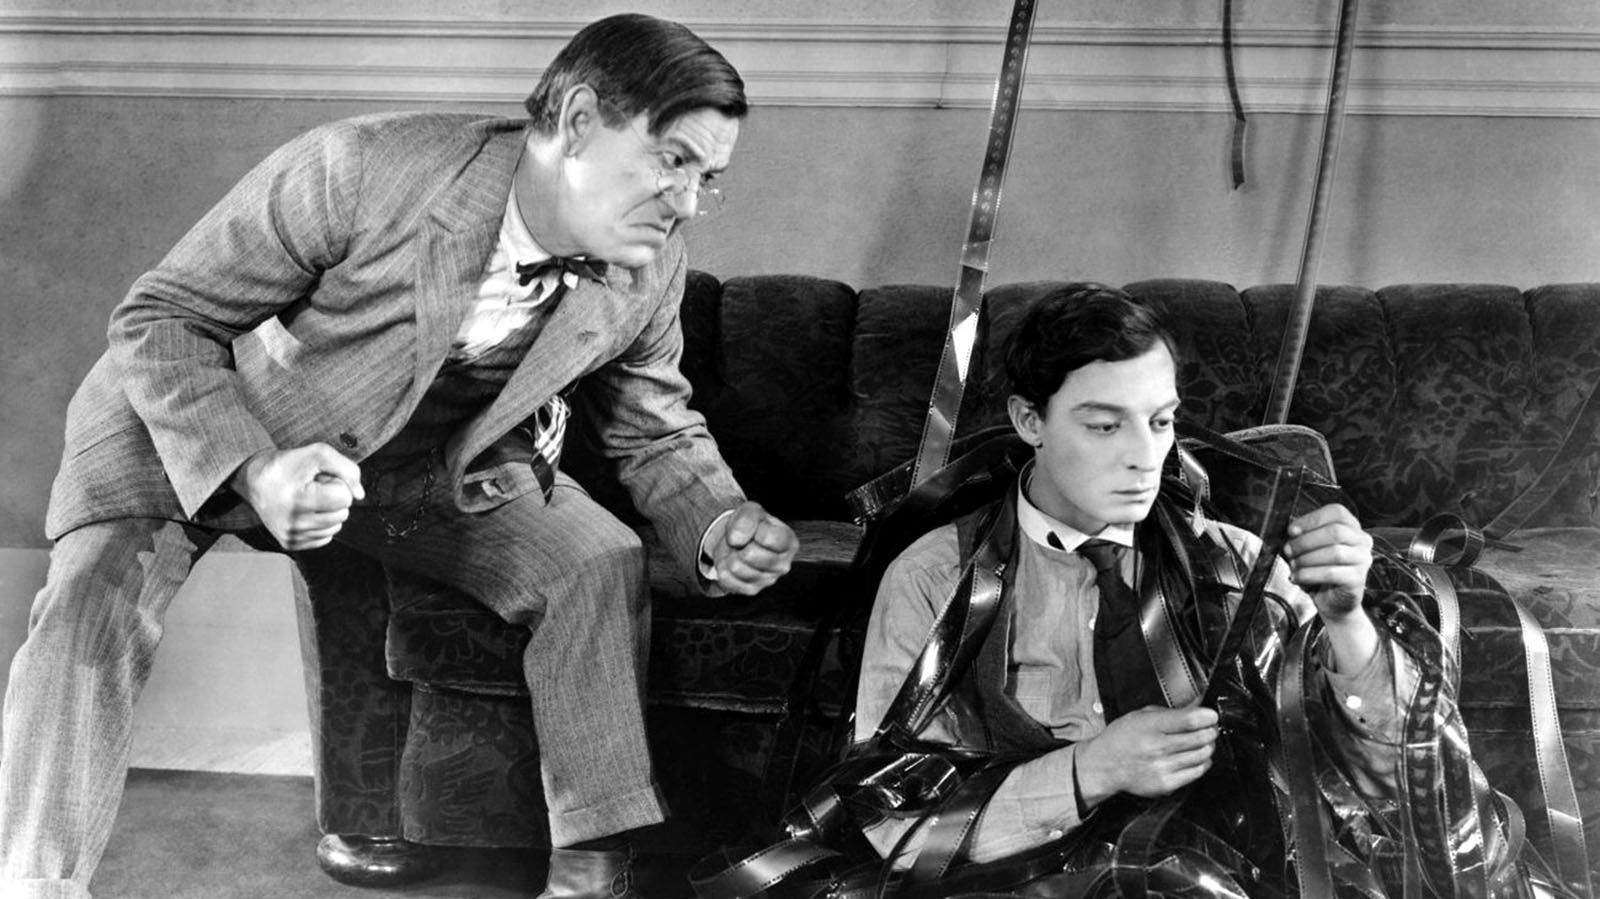 Buster Keaton's "Sherlock Jr" will be shown July 14 at Embassy Theatre as part of their Silent Film Series.